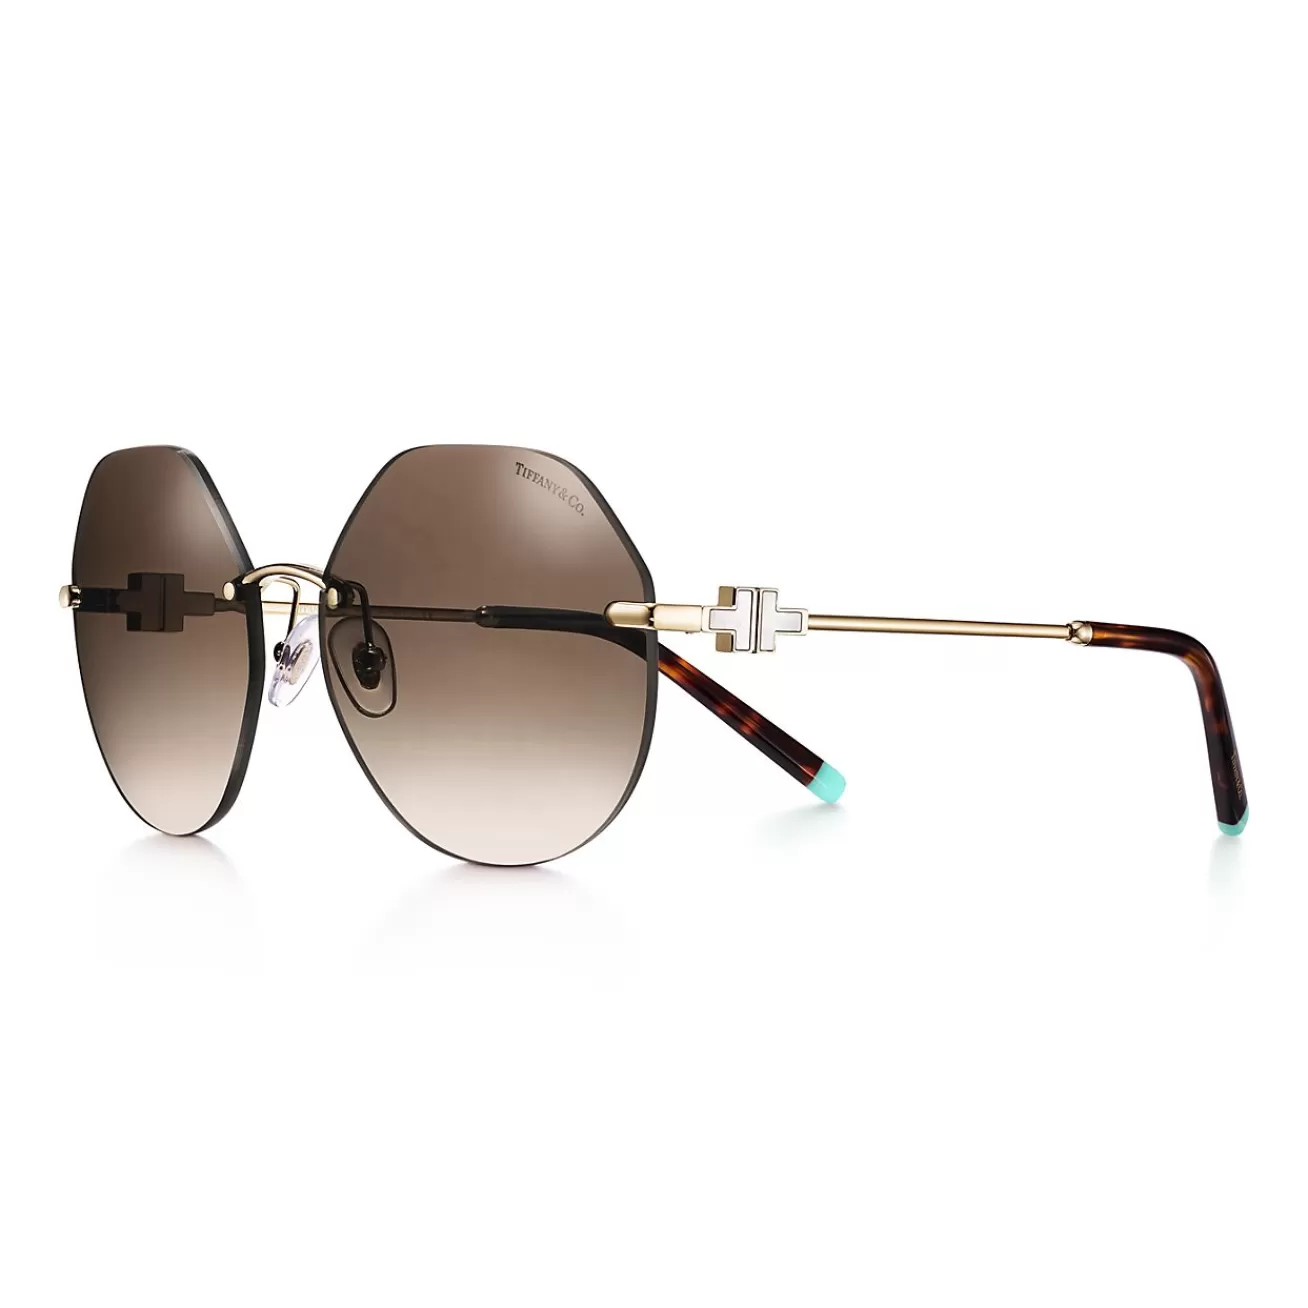 Tiffany & Co. Tiffany T Hexagonal Sunglasses in Pale Gold-colored Metal with Mother-of-pearl | ^ Tiffany T | Sunglasses